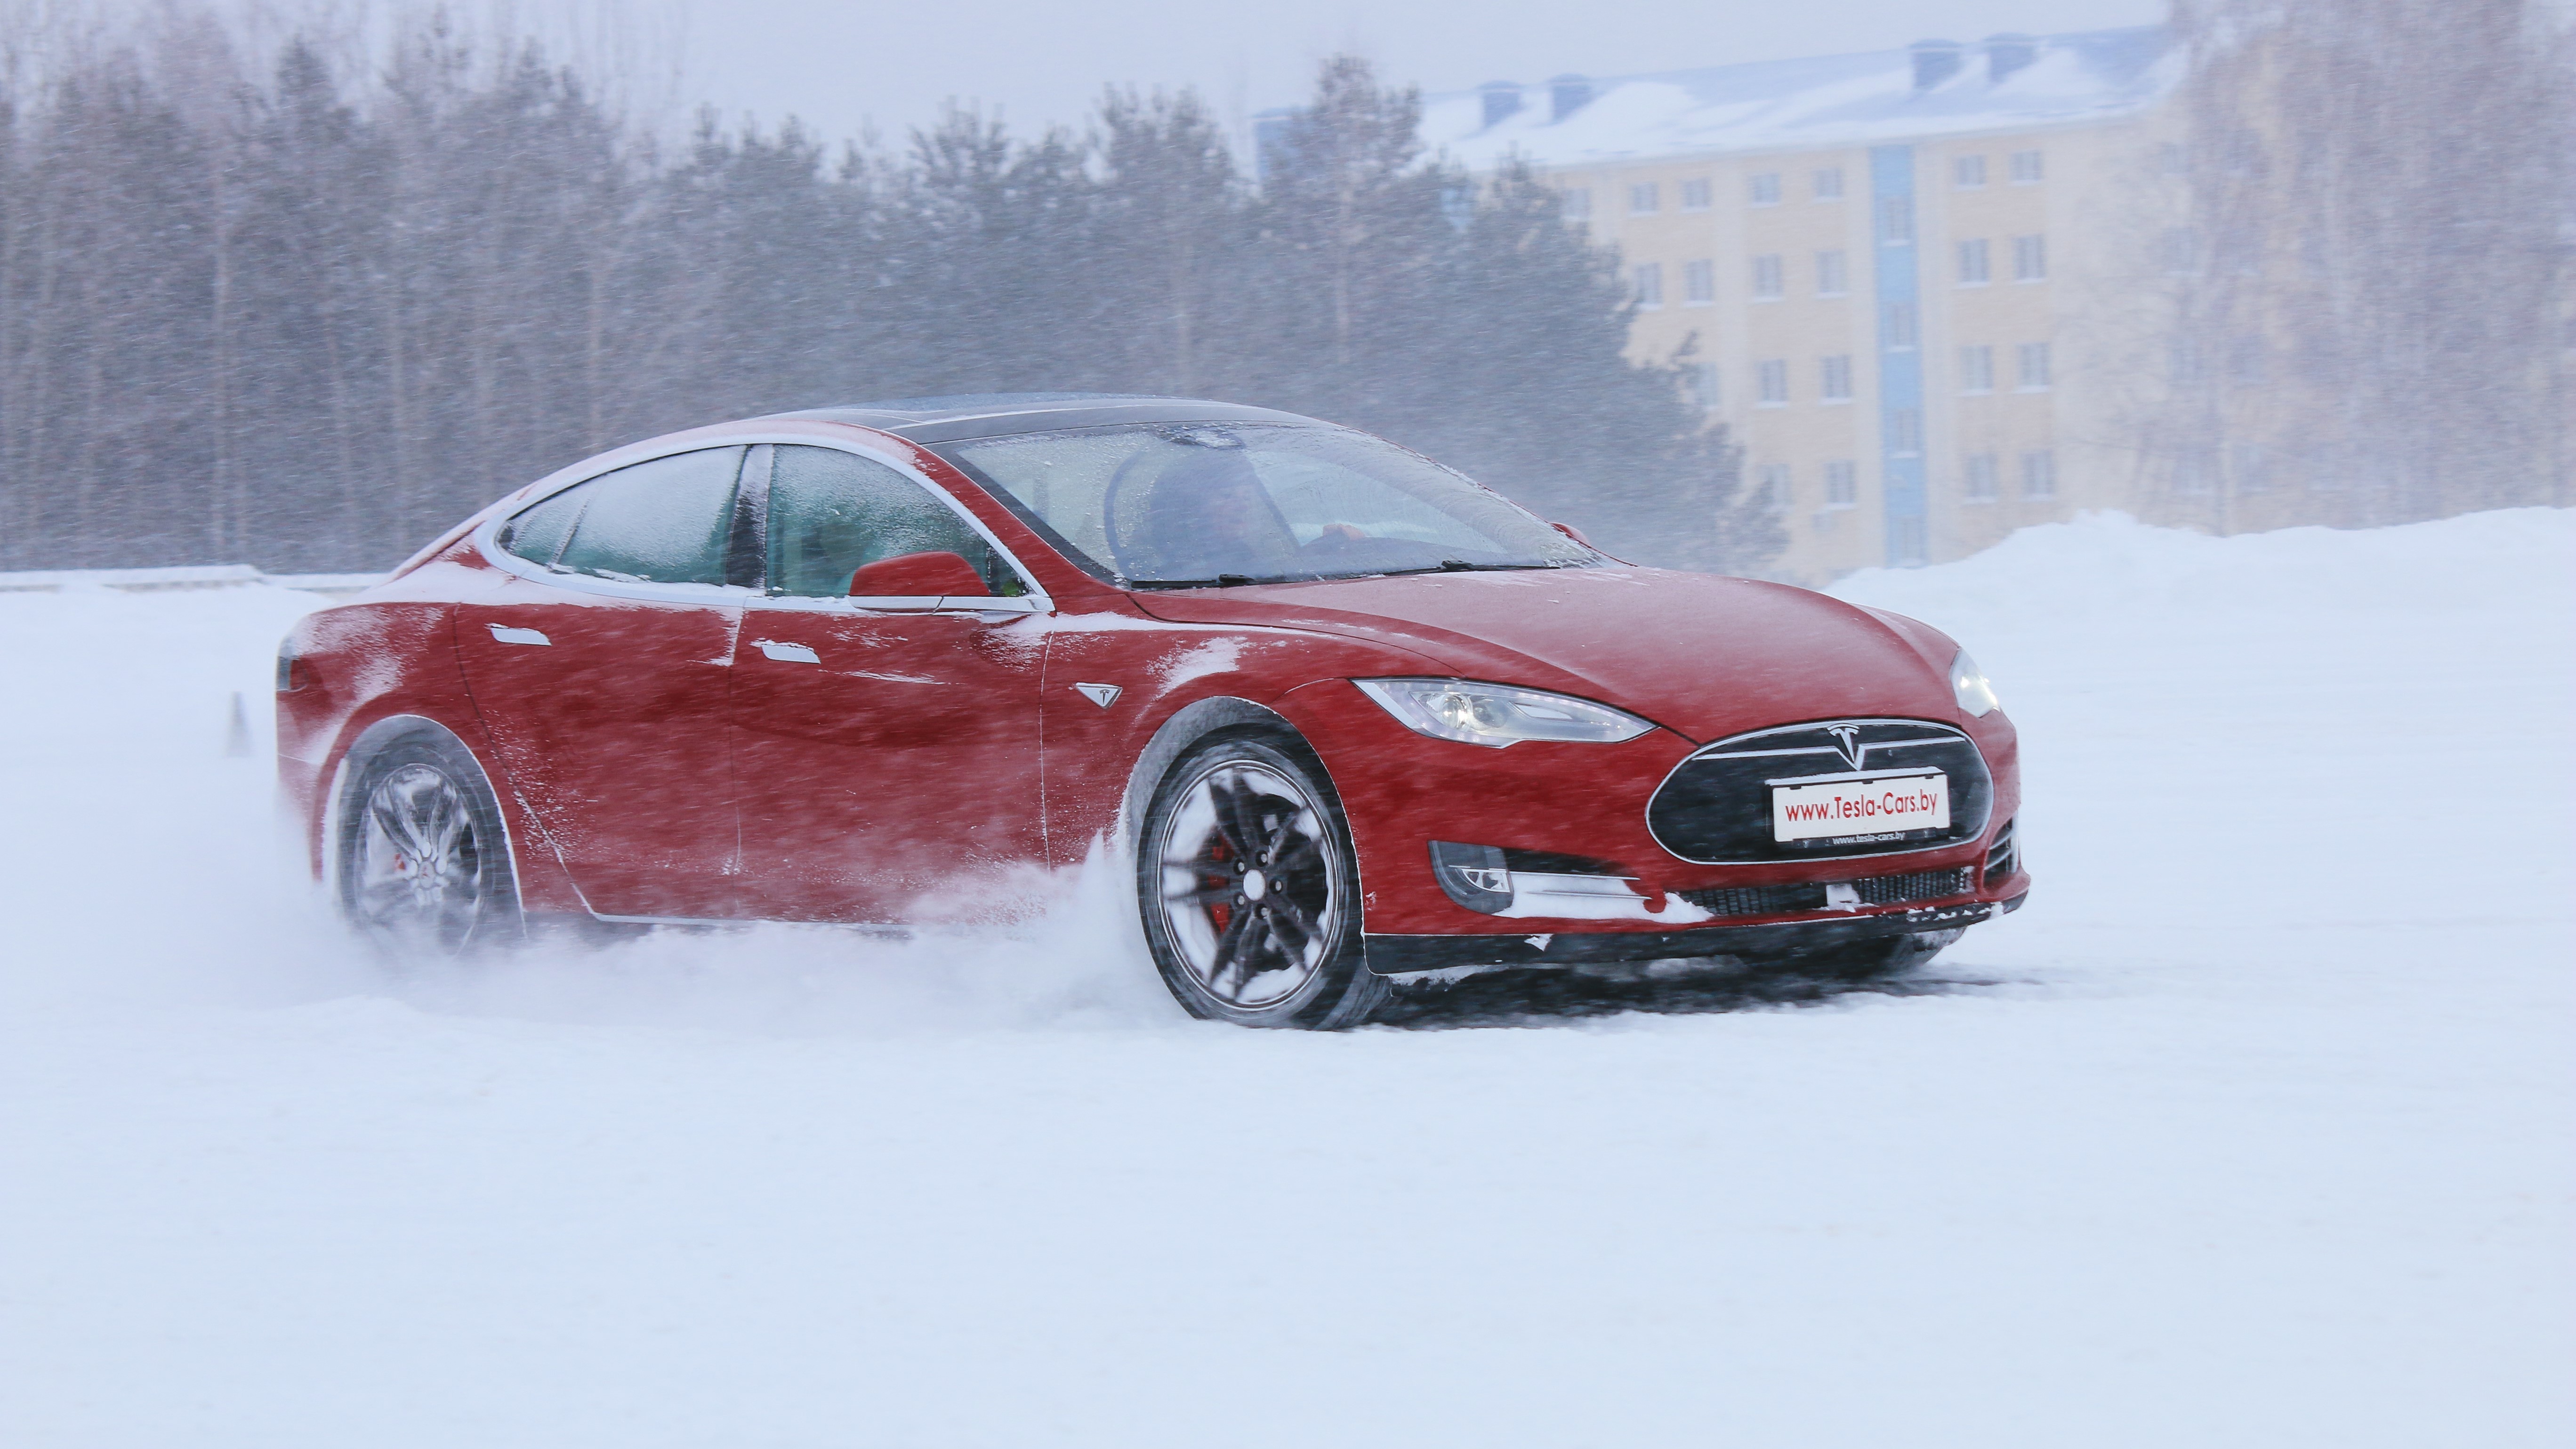 Red Teslamodels driving in snowy conditions